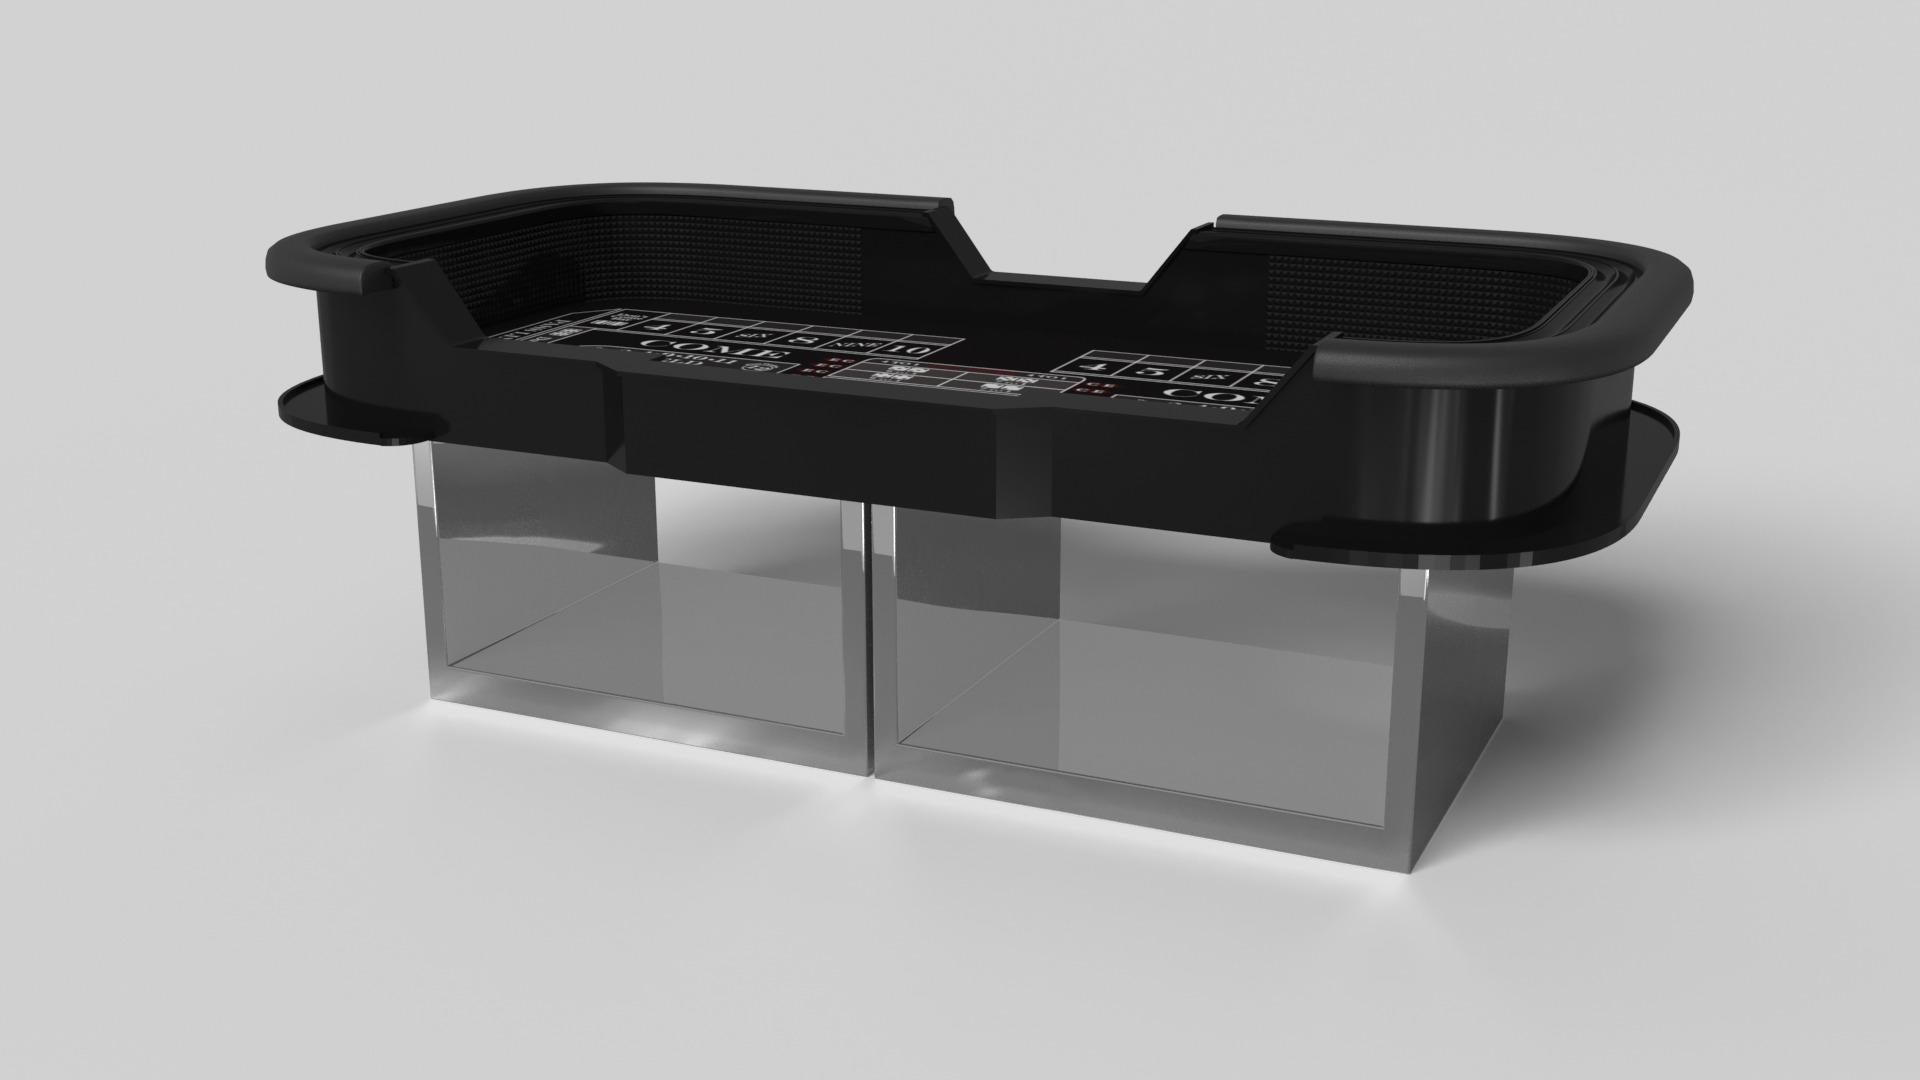 Supported by two rectangular open pedestals as the base, the Ambrosia craps table is modern and minimalistic with its combination of simple, geometric forms. Viewed from the front, the use of negative space is evident; viewed from the side, the base